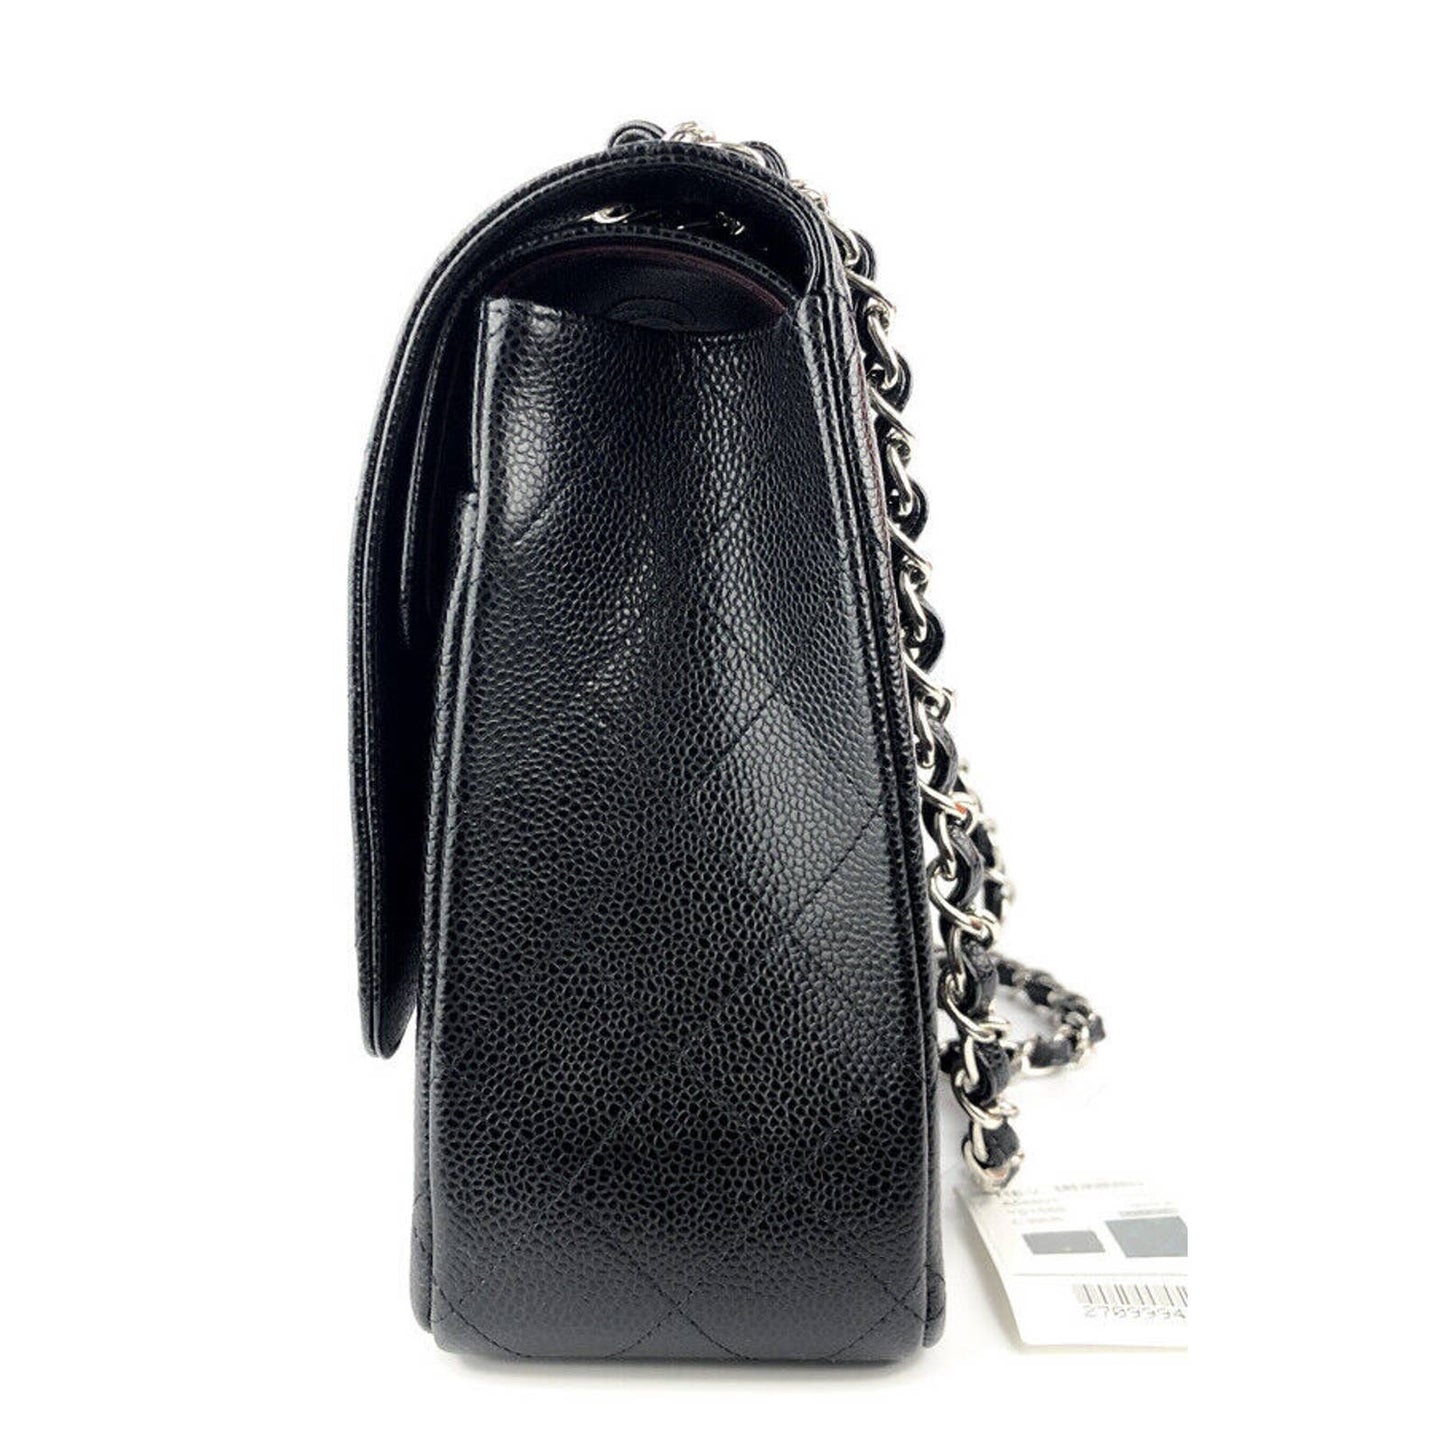 CHANEL Classic Maxi Double Flap Bag Black Caviar Leather Silver Hardware